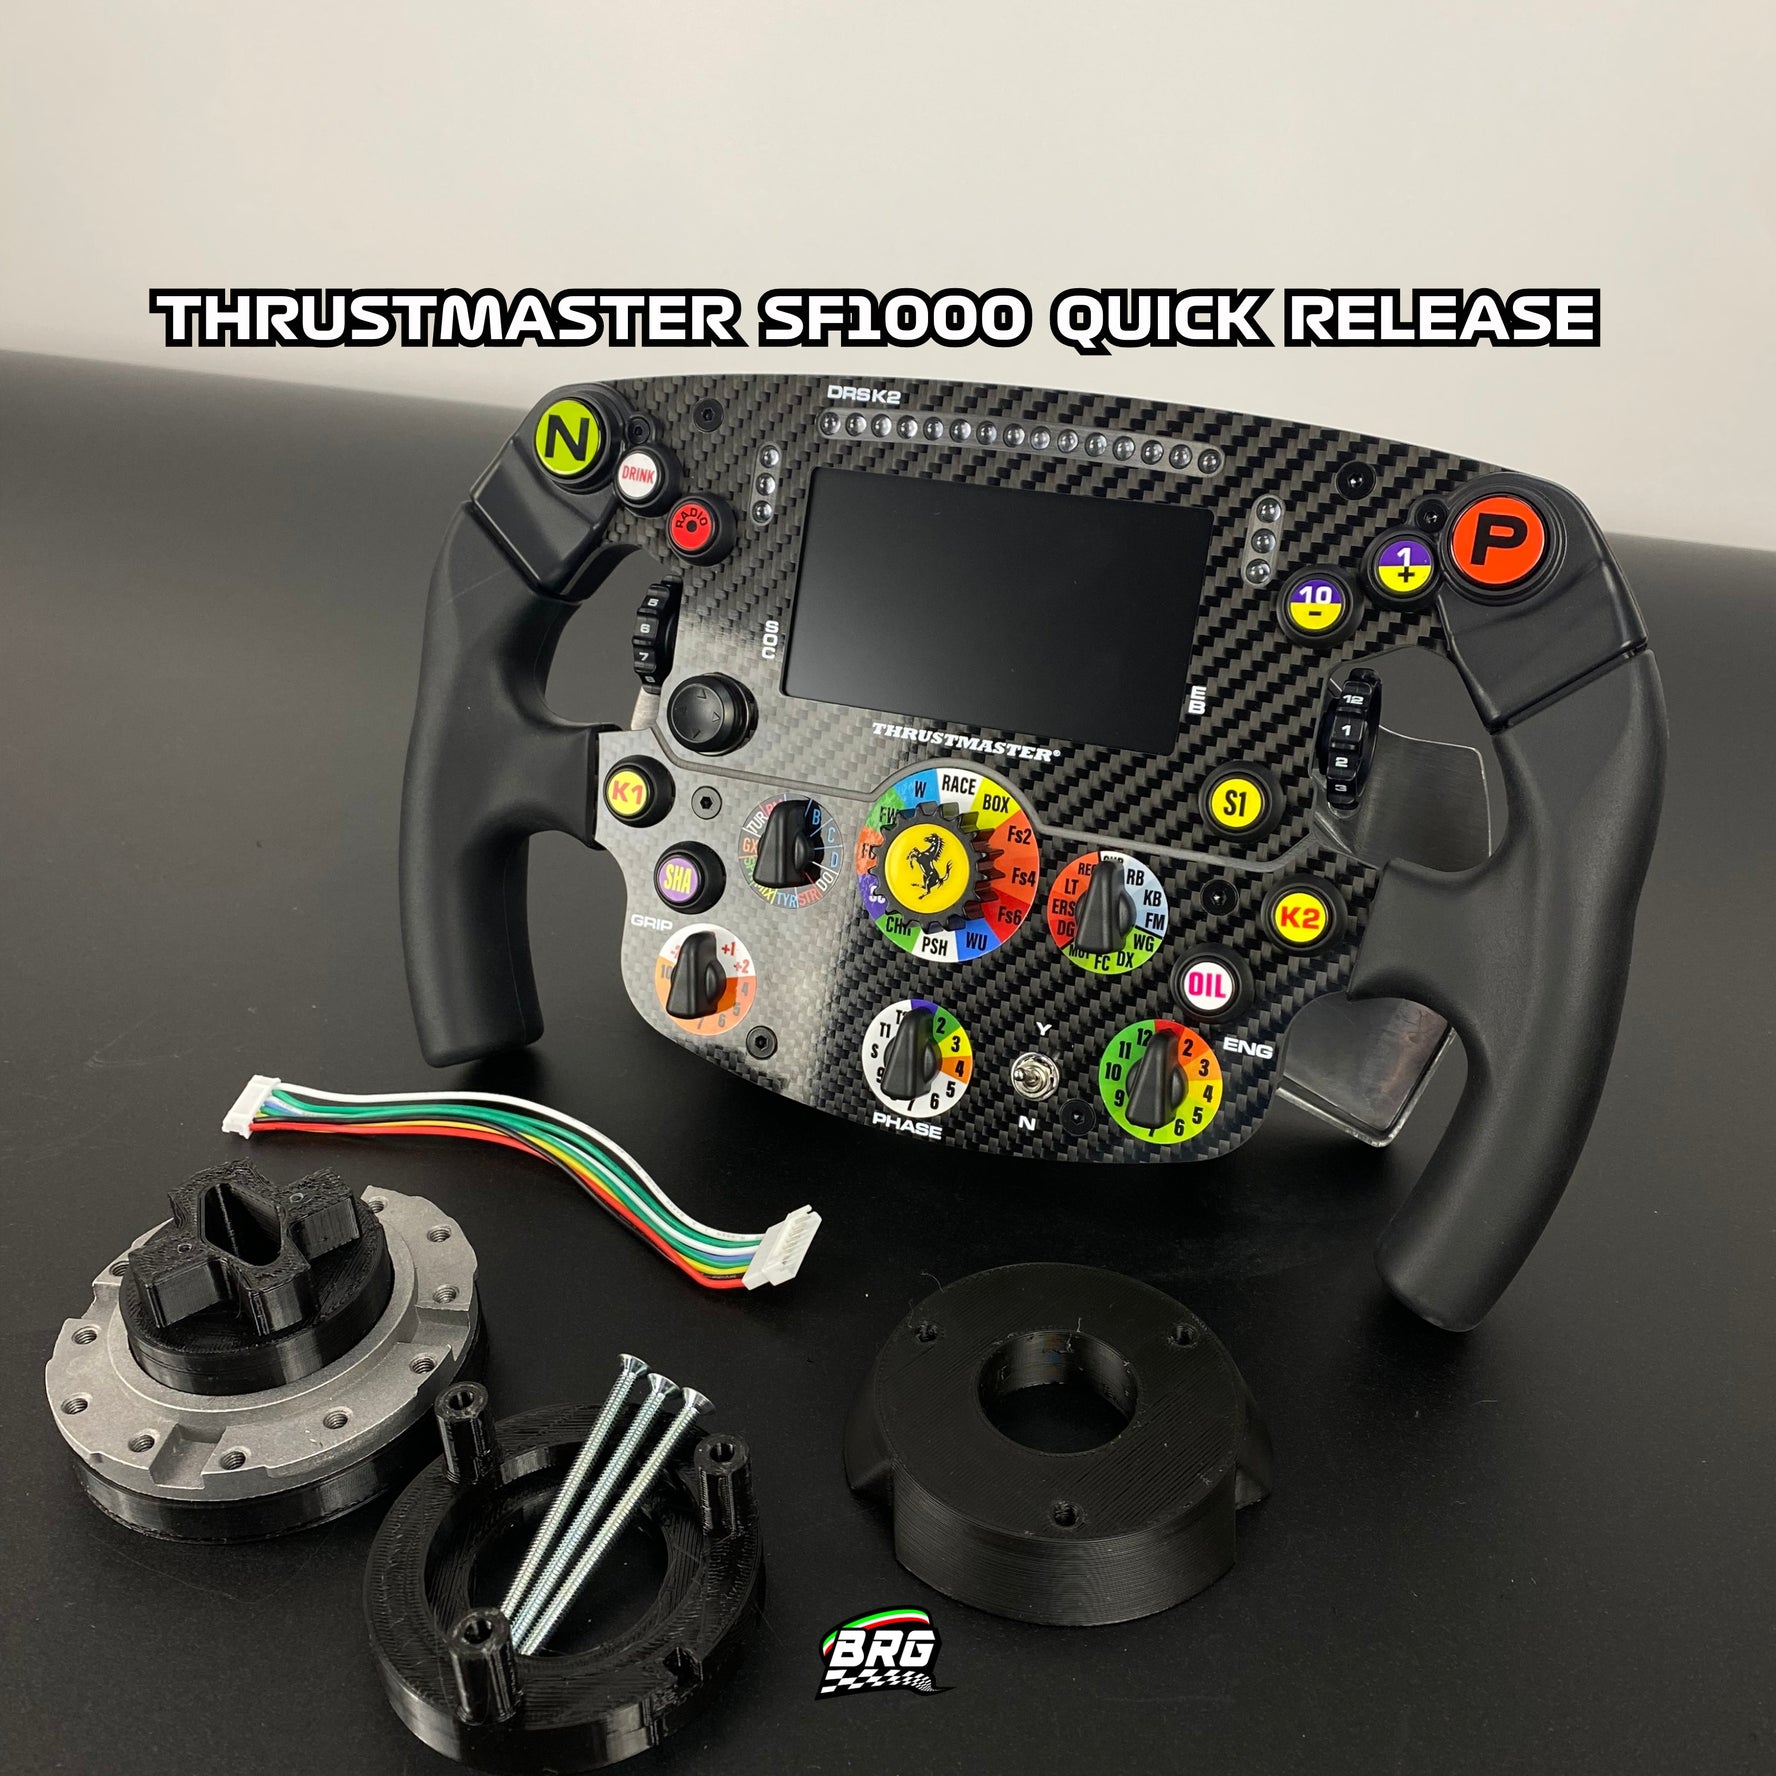 Thrustmaster SF1000 Quick Release